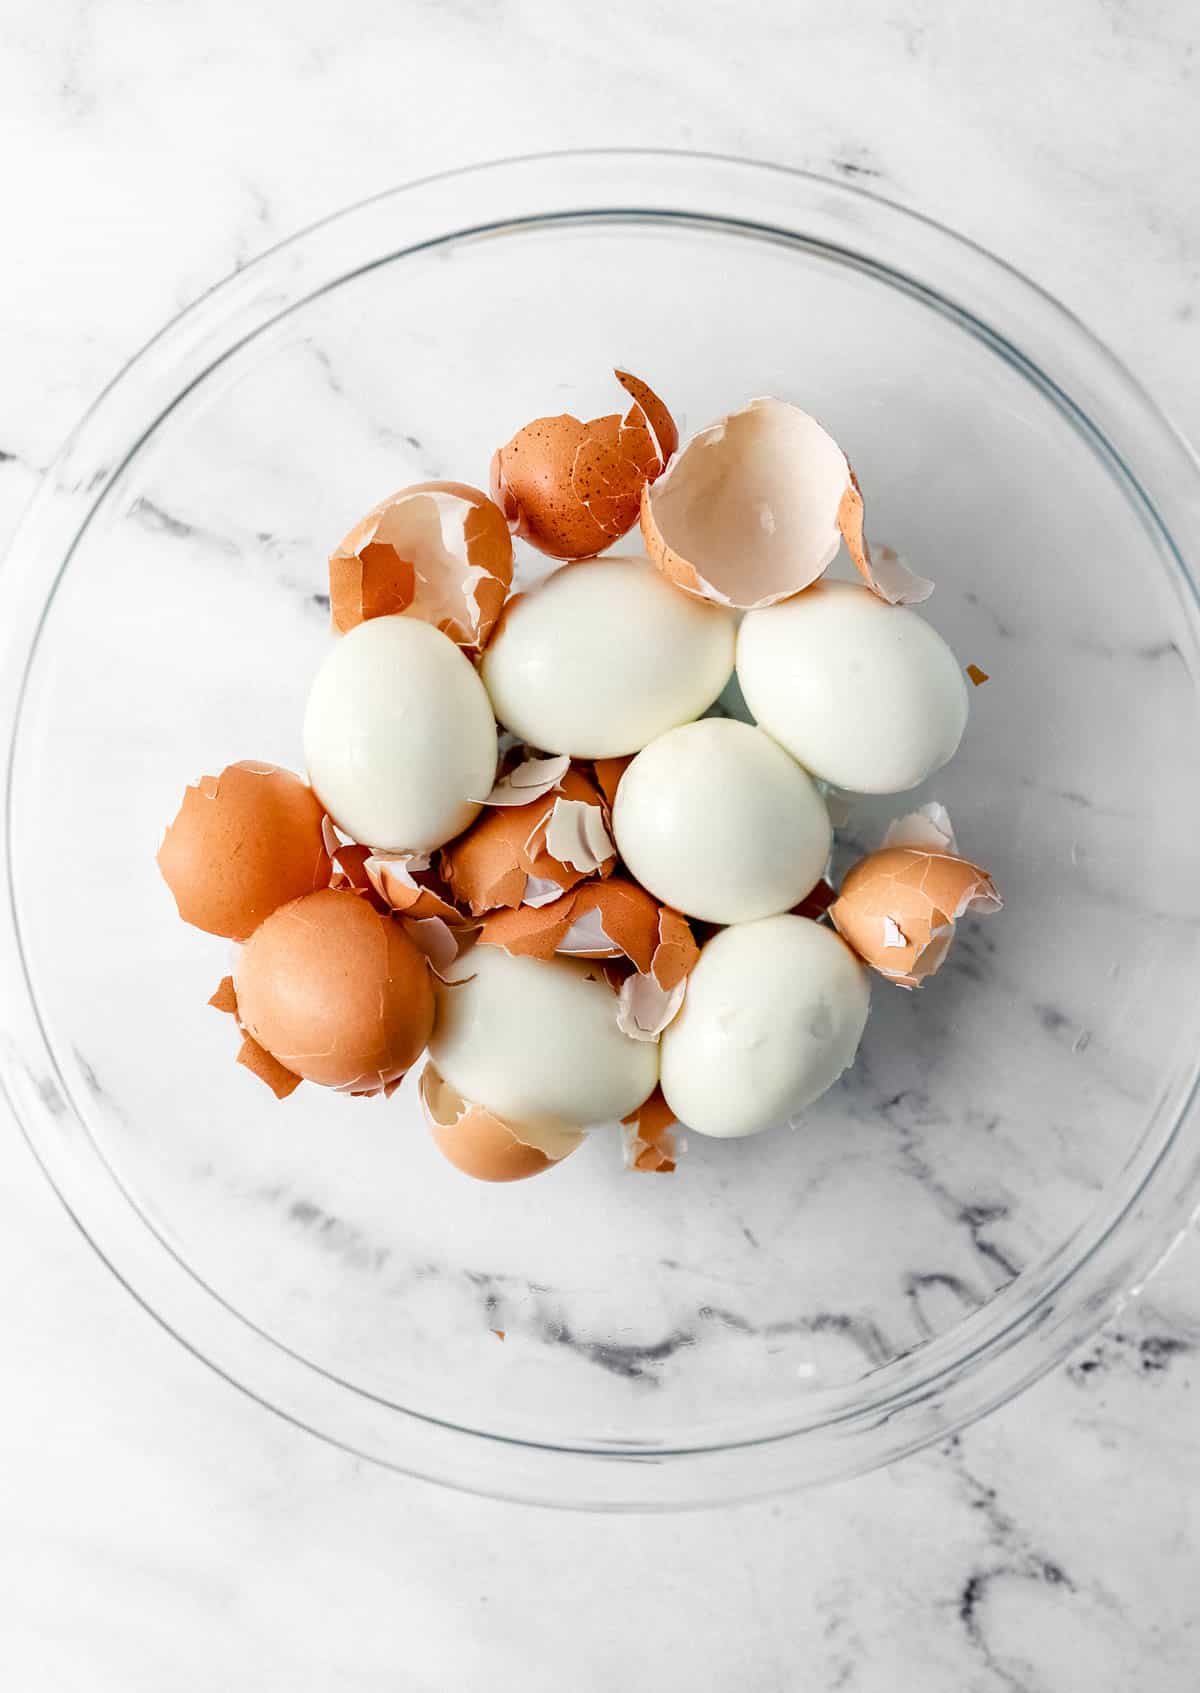 Large glass bowl with six hard boiled eggs, peeled with shells still in the bowl. 